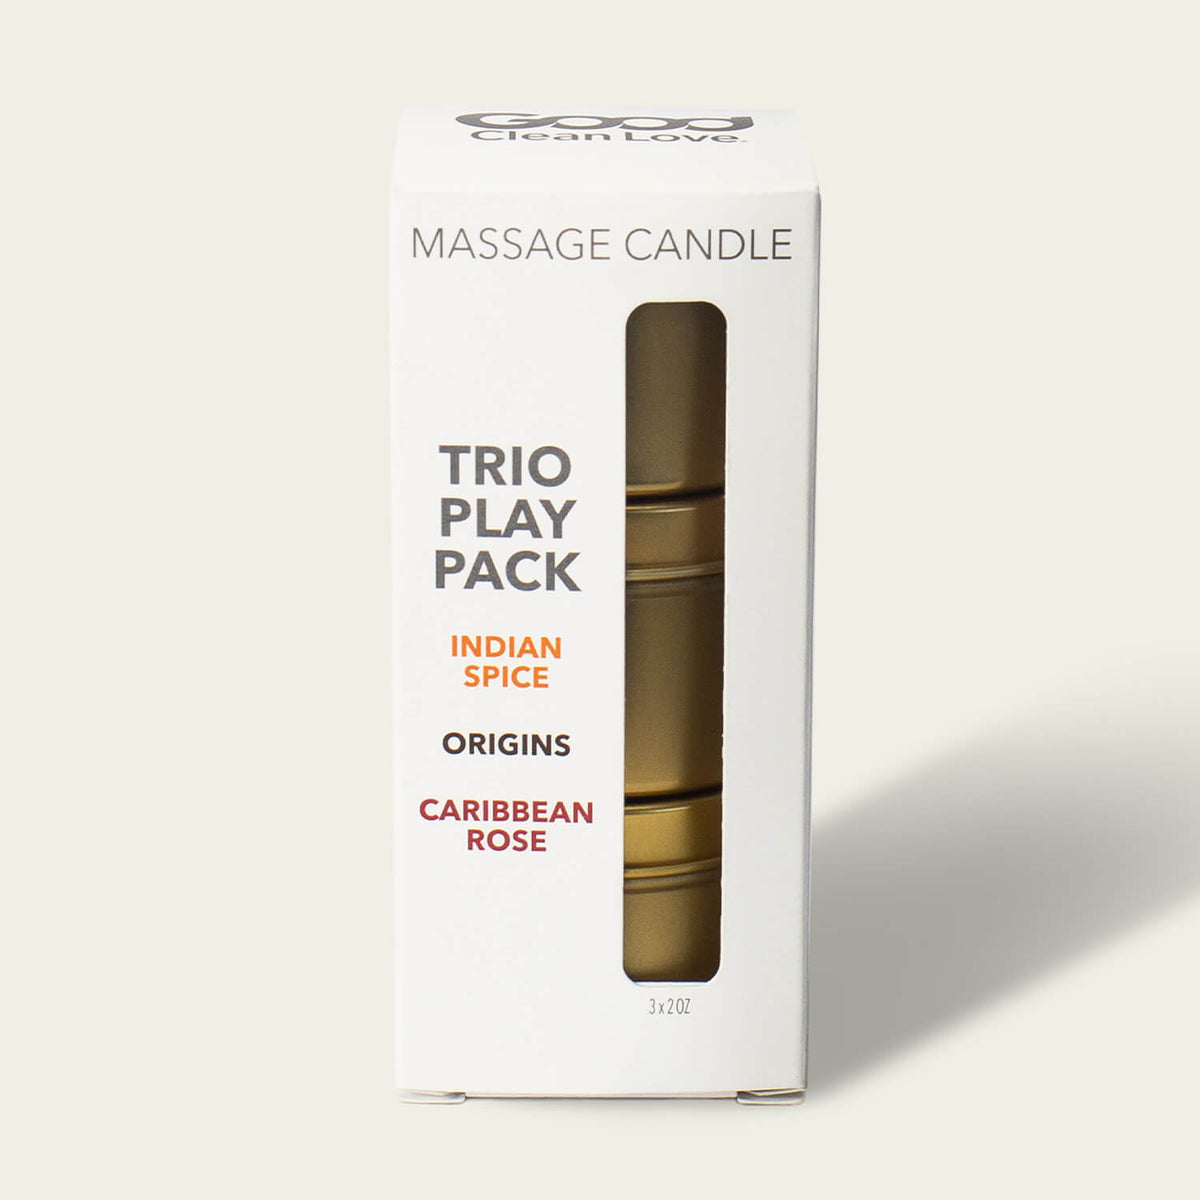 Trio Play Pack Massage Candle 2 oz